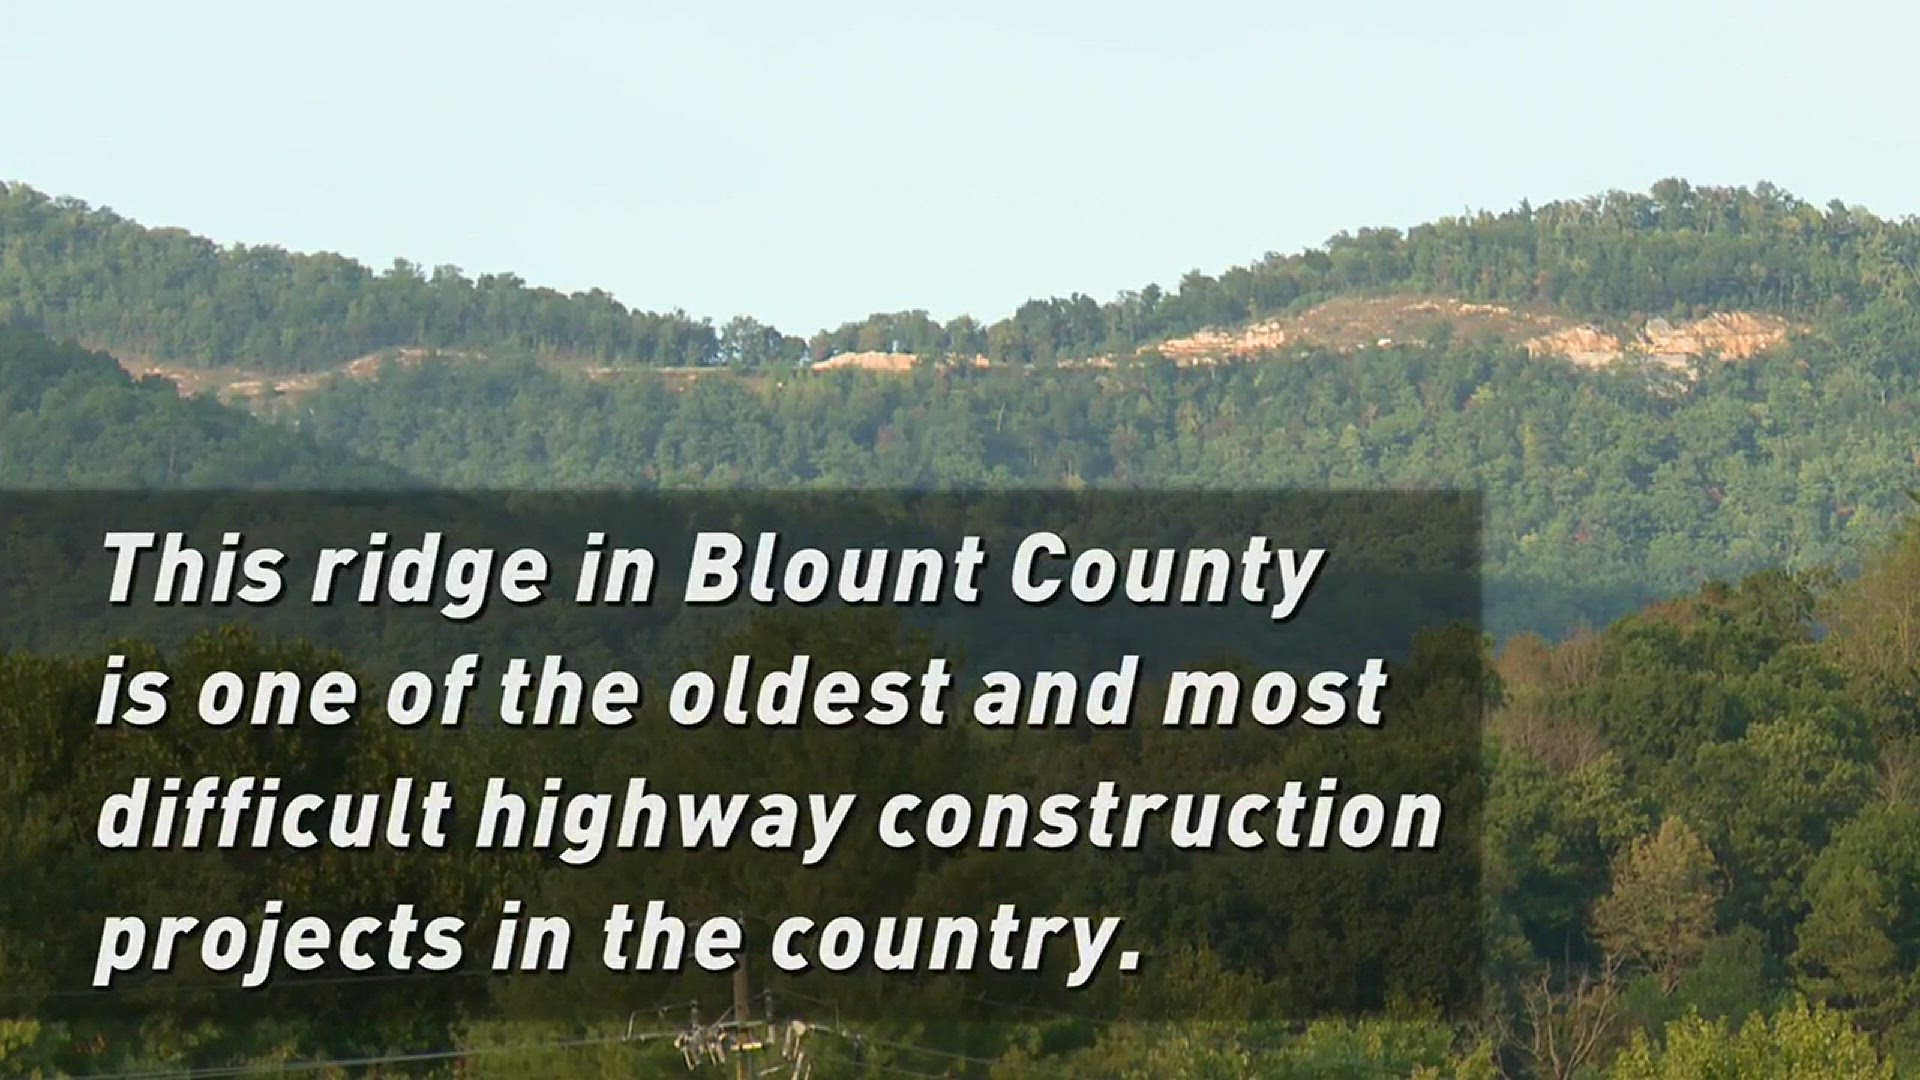 Oct. 31, 2016:  Tonight at 6PM, go behind the road blocks to see the progress the Foothills Parkway's "missing link." We'll show you the bridges that are nearly complete and the splendid scenery drivers will someday enjoy.